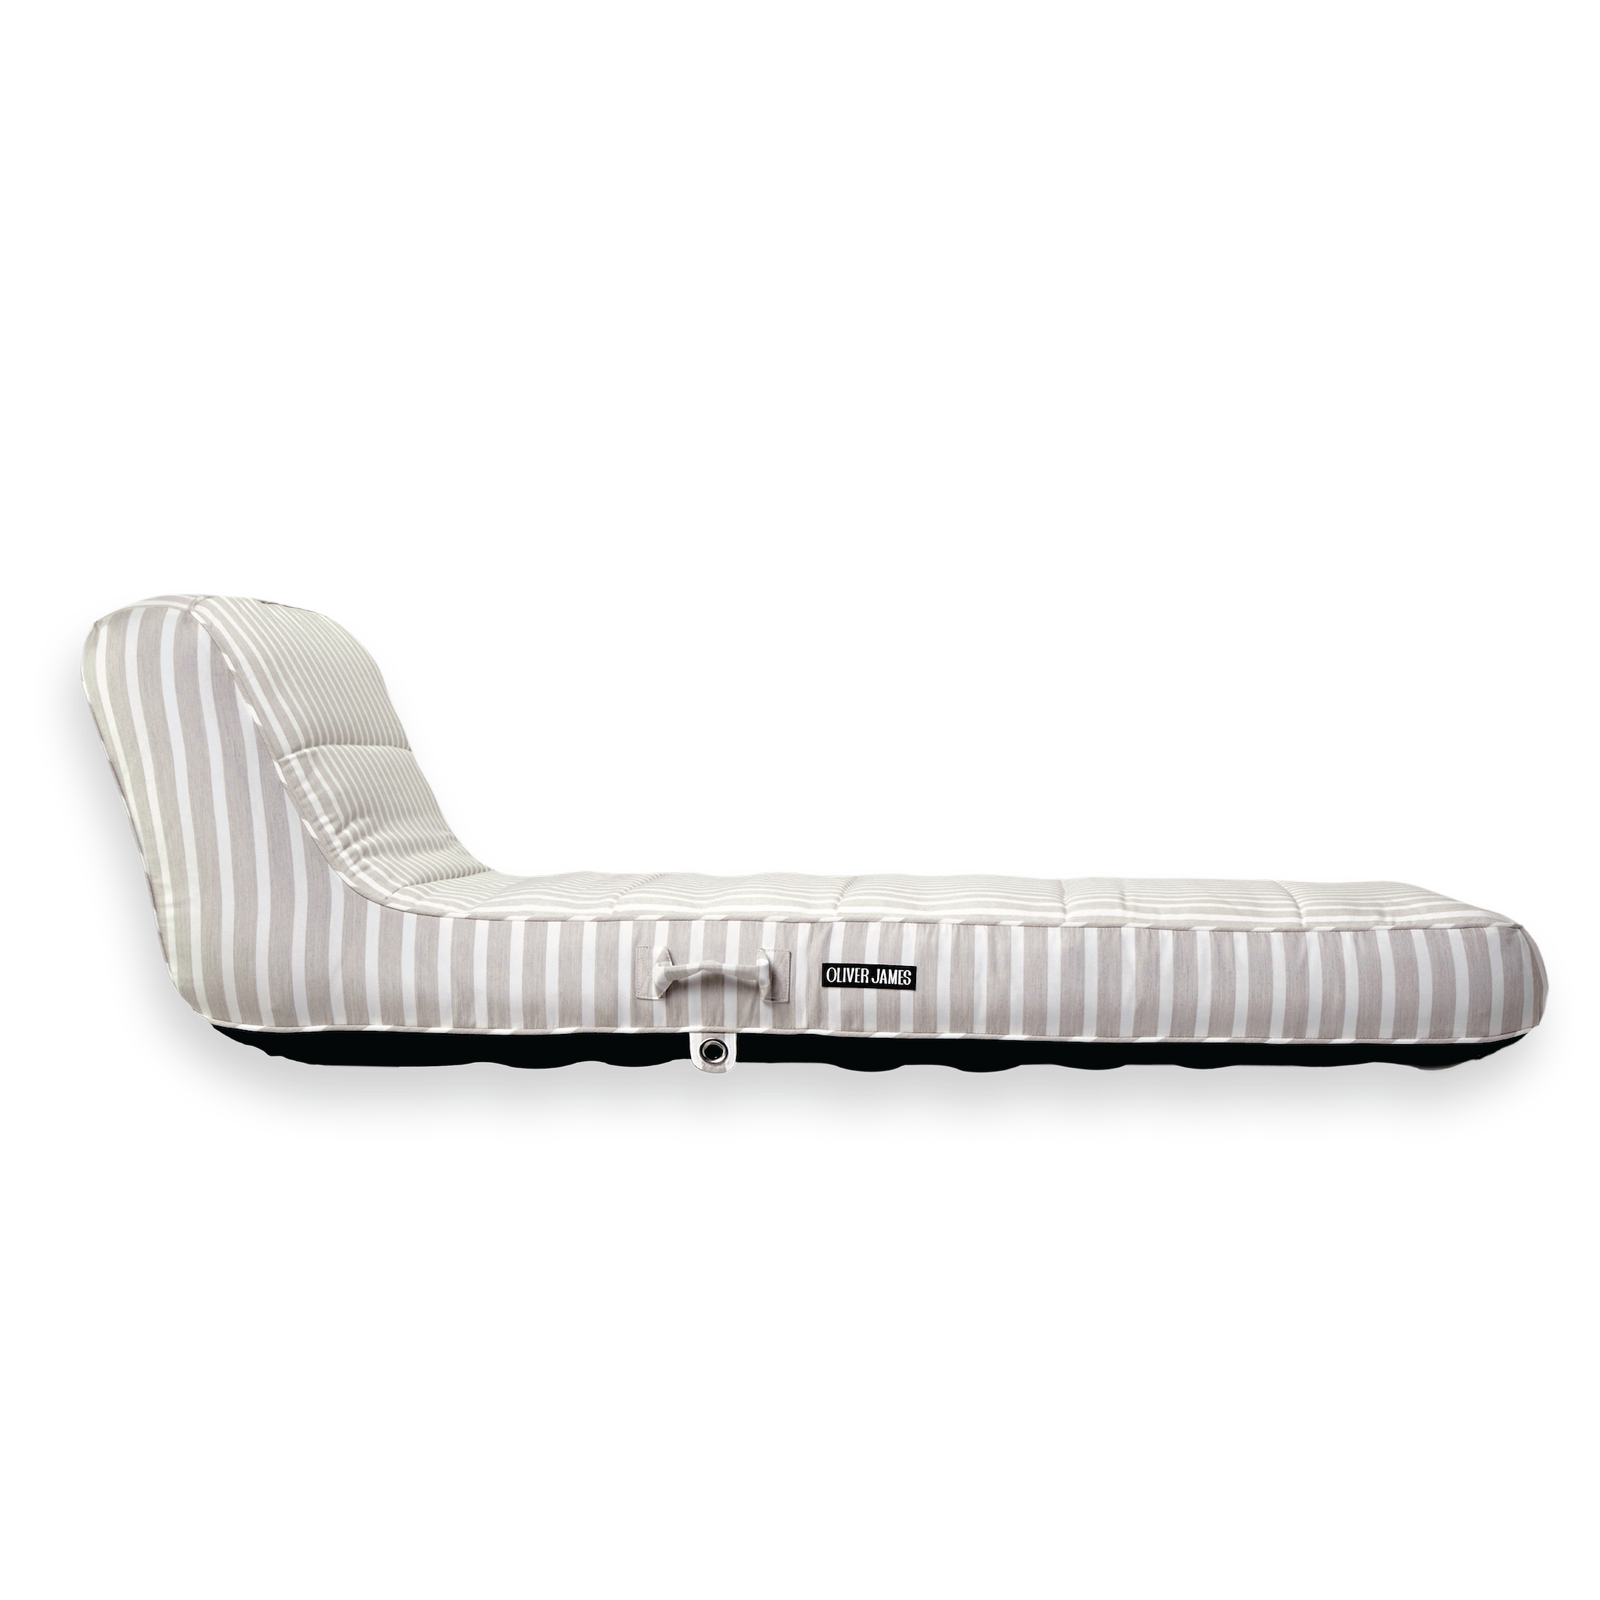 The side profile and backrest angle of a single beige and white stripe luxury pool float.